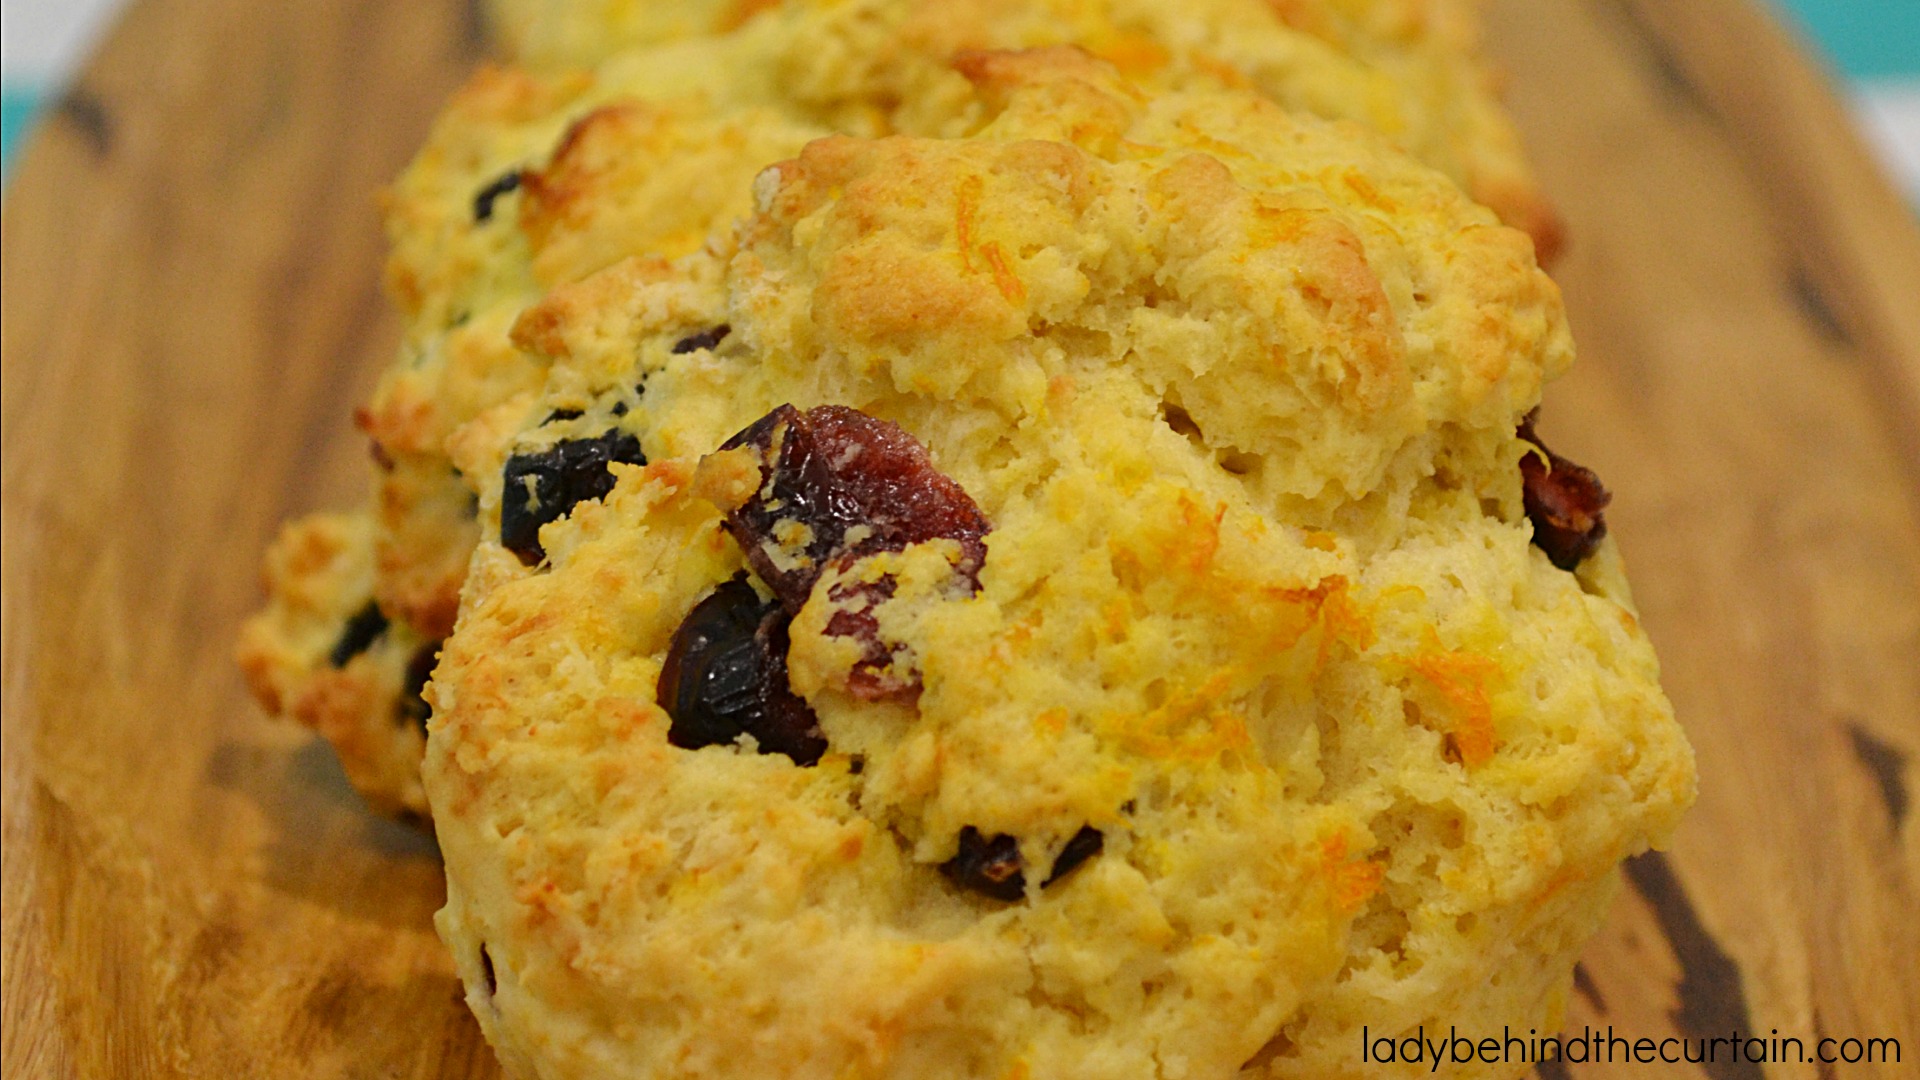 13 Biscuit Recipes | Breakfast, lunch, dinner and even dessert! This round up has a biscuit recipe for any time of the day. From Italian, Chipotle Honey, Peach Cobbler and Pumpkin Spice just to name a few.